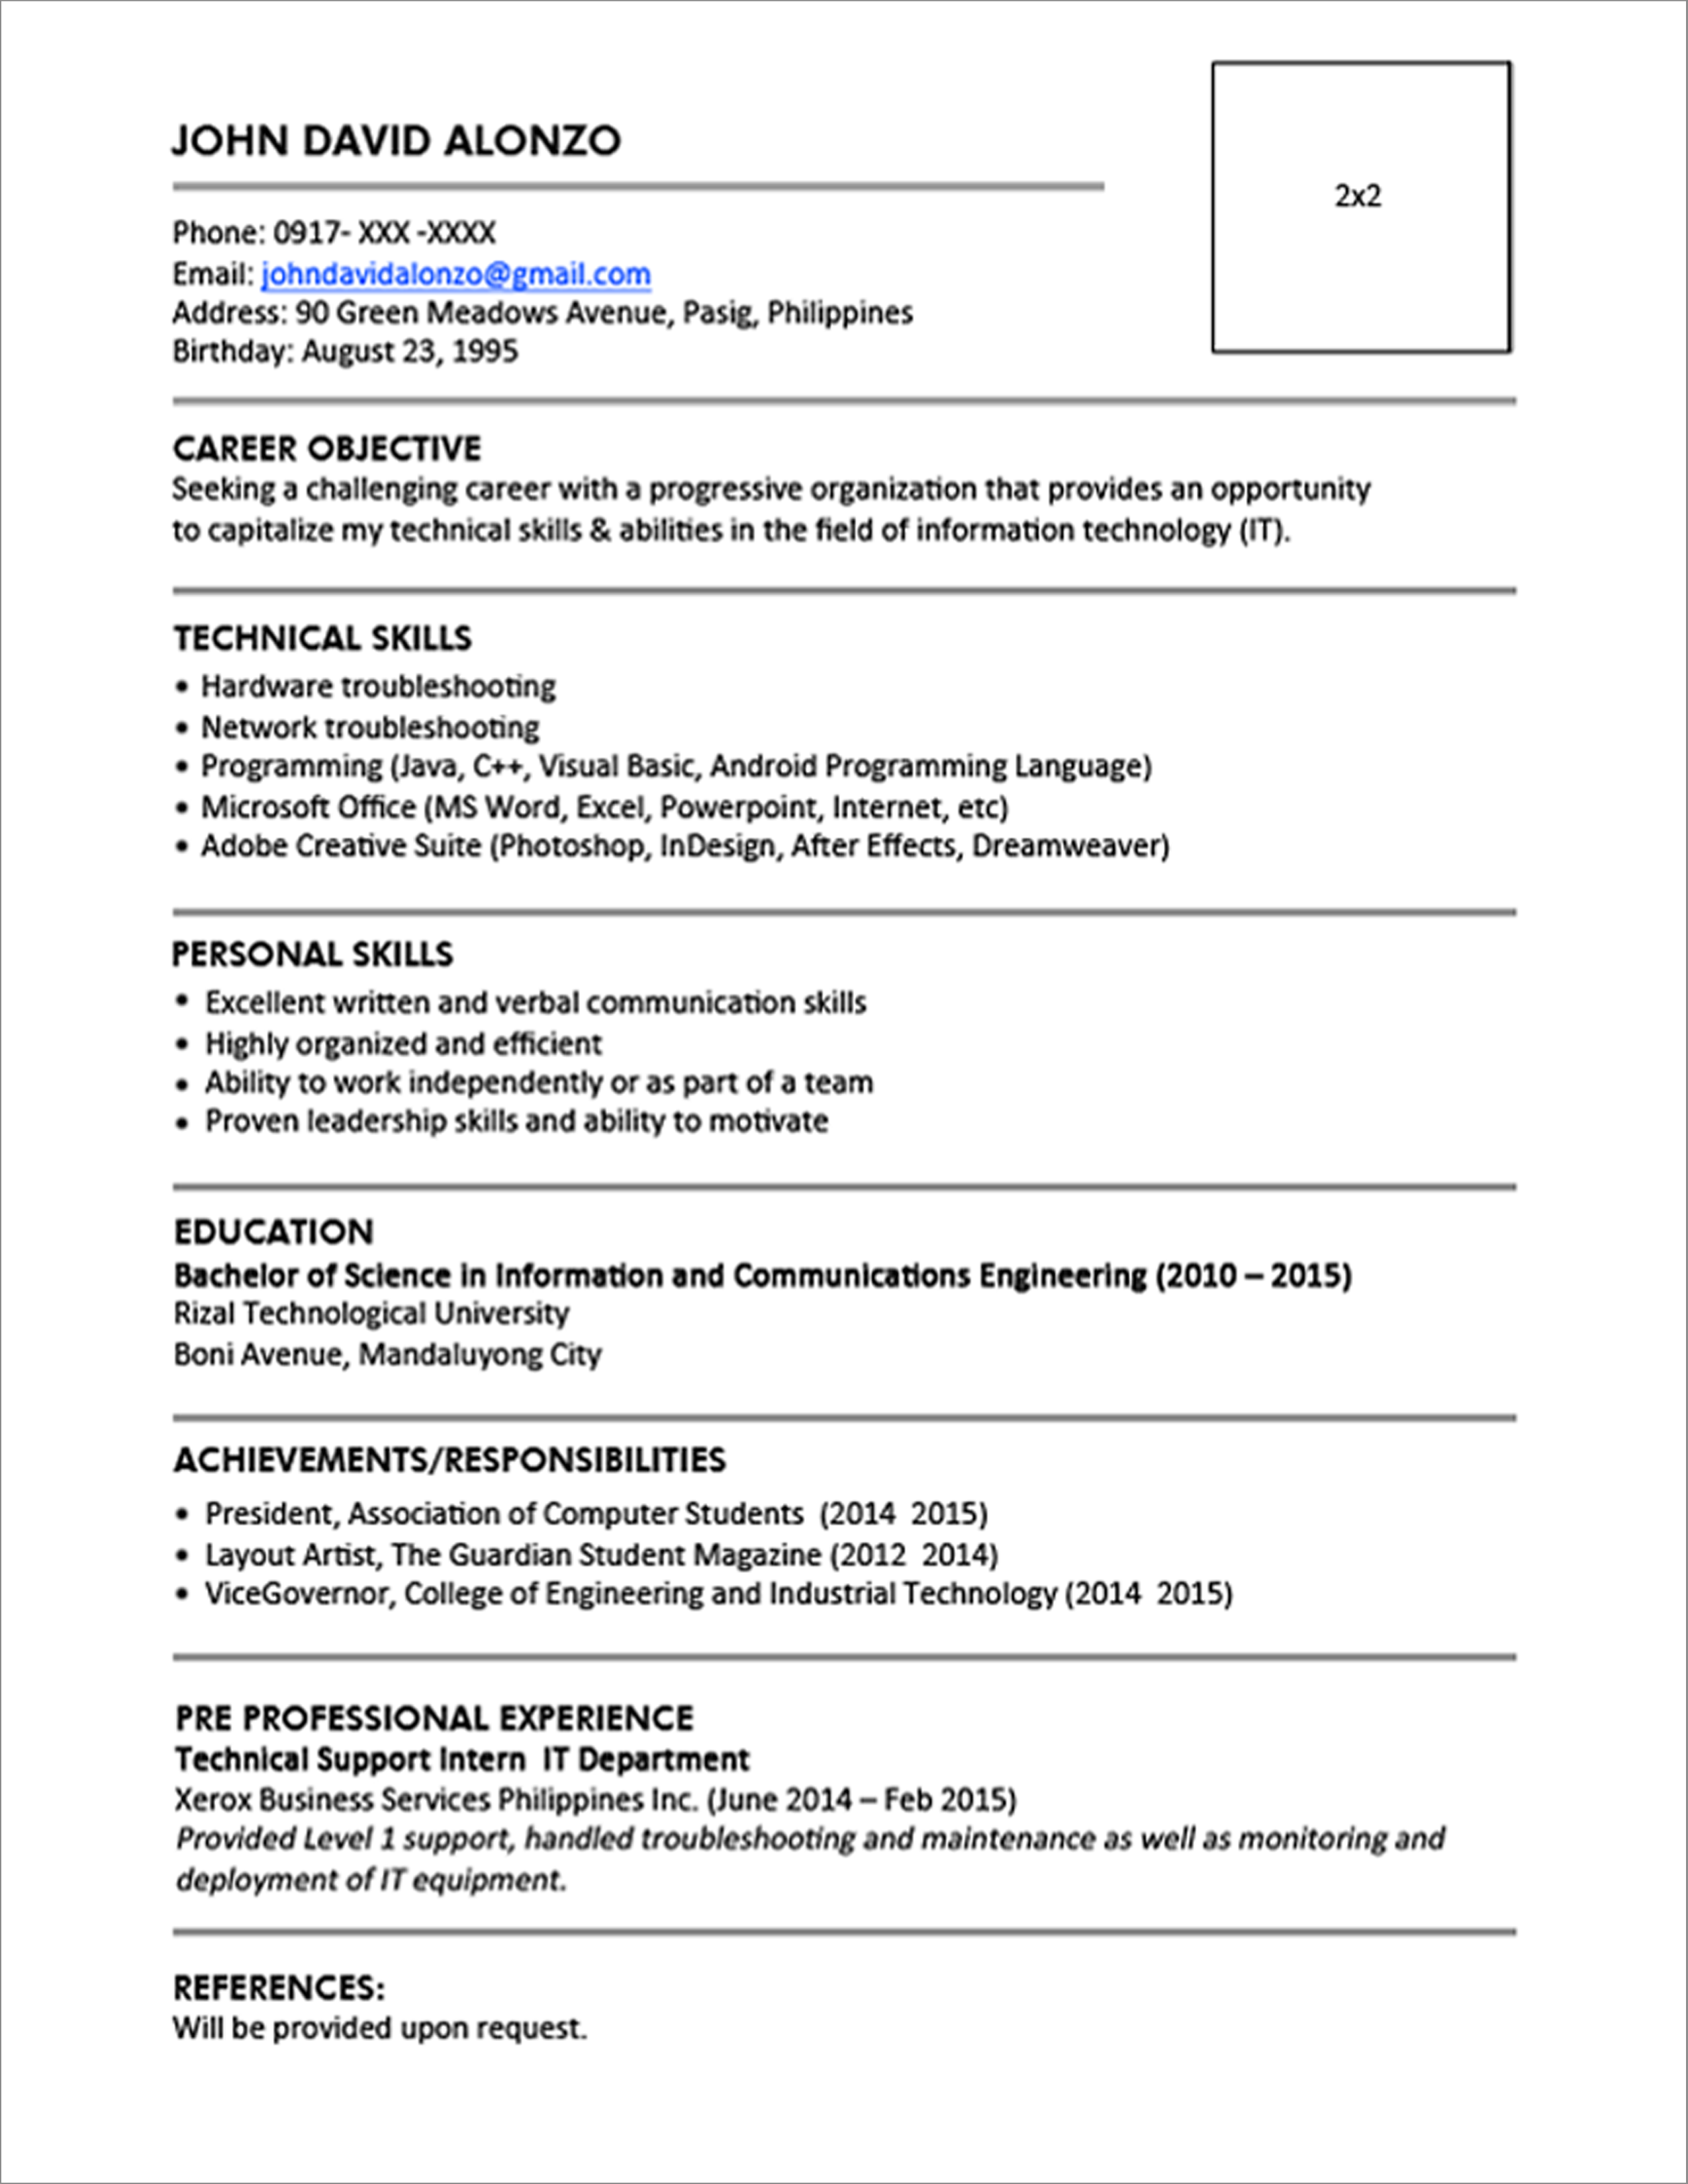 Resume Format One Page 